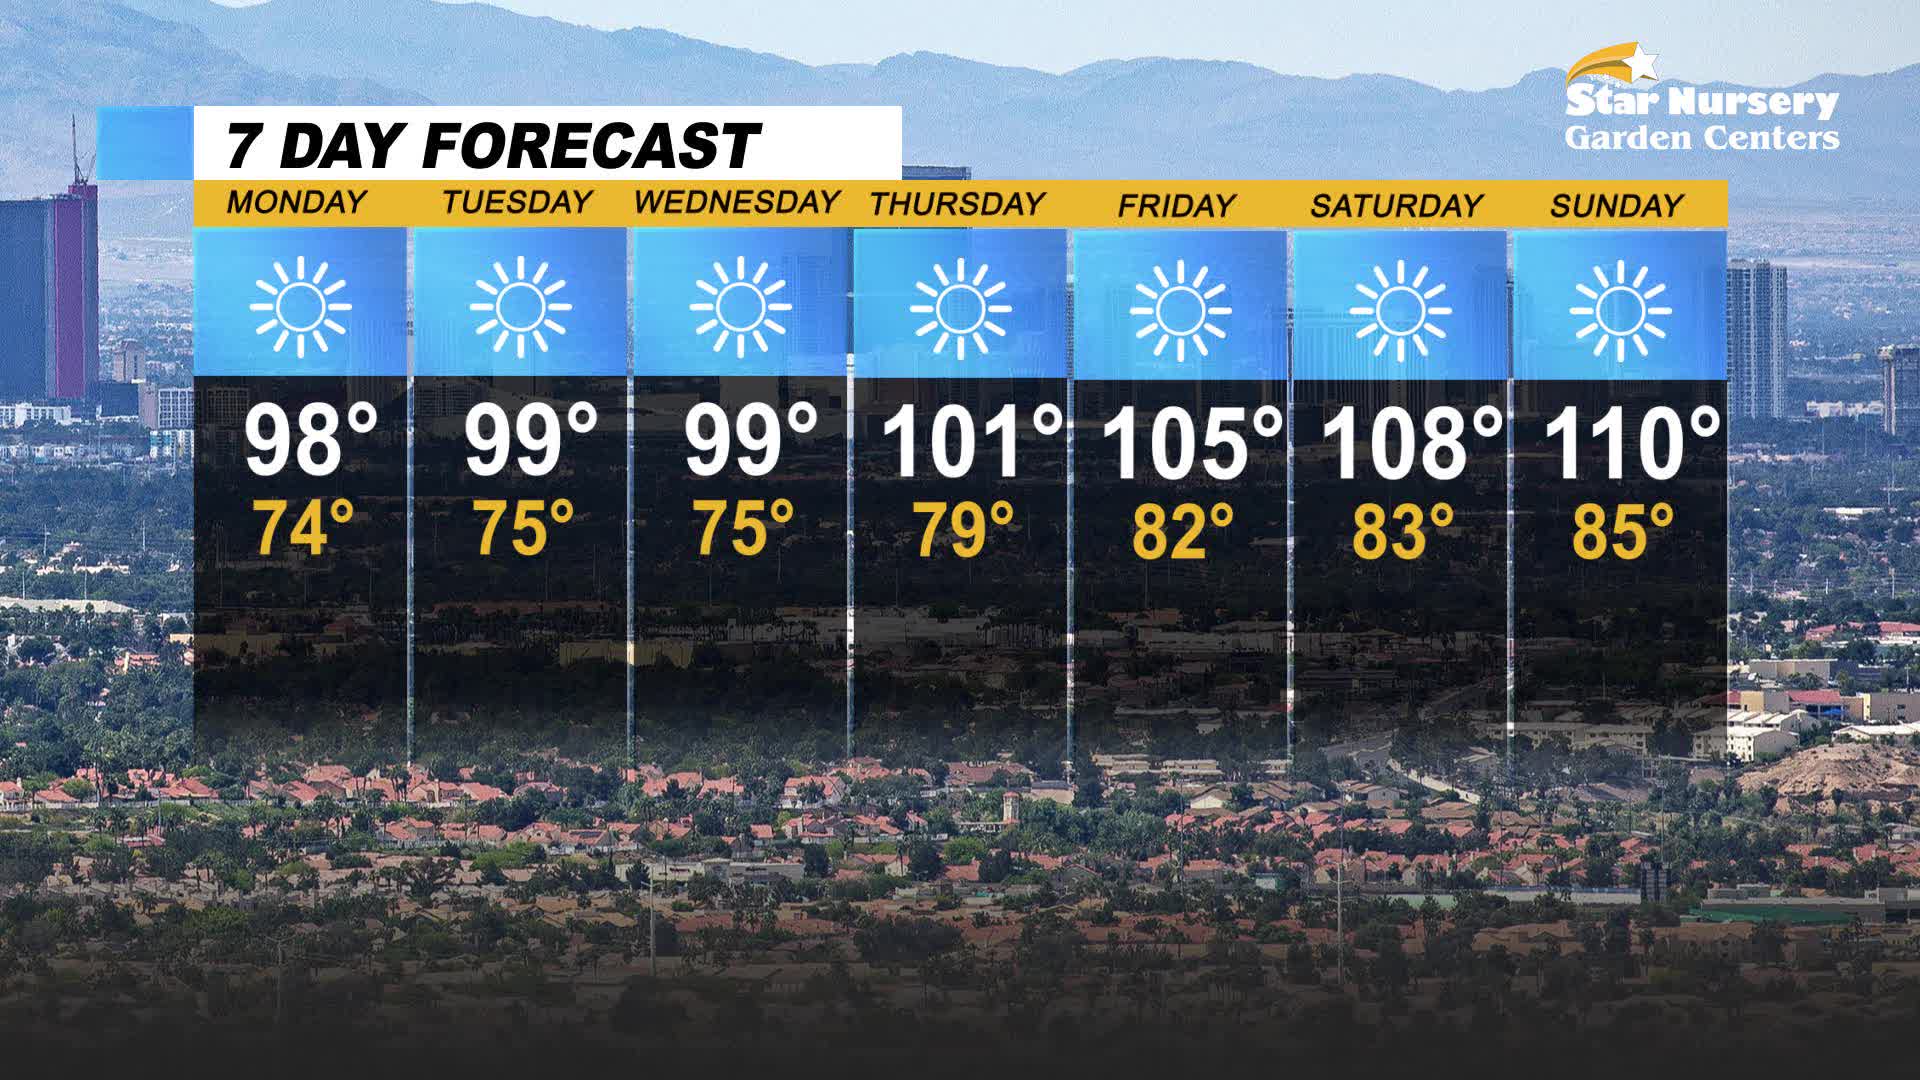 Temperatures could reach 100 by Thursday